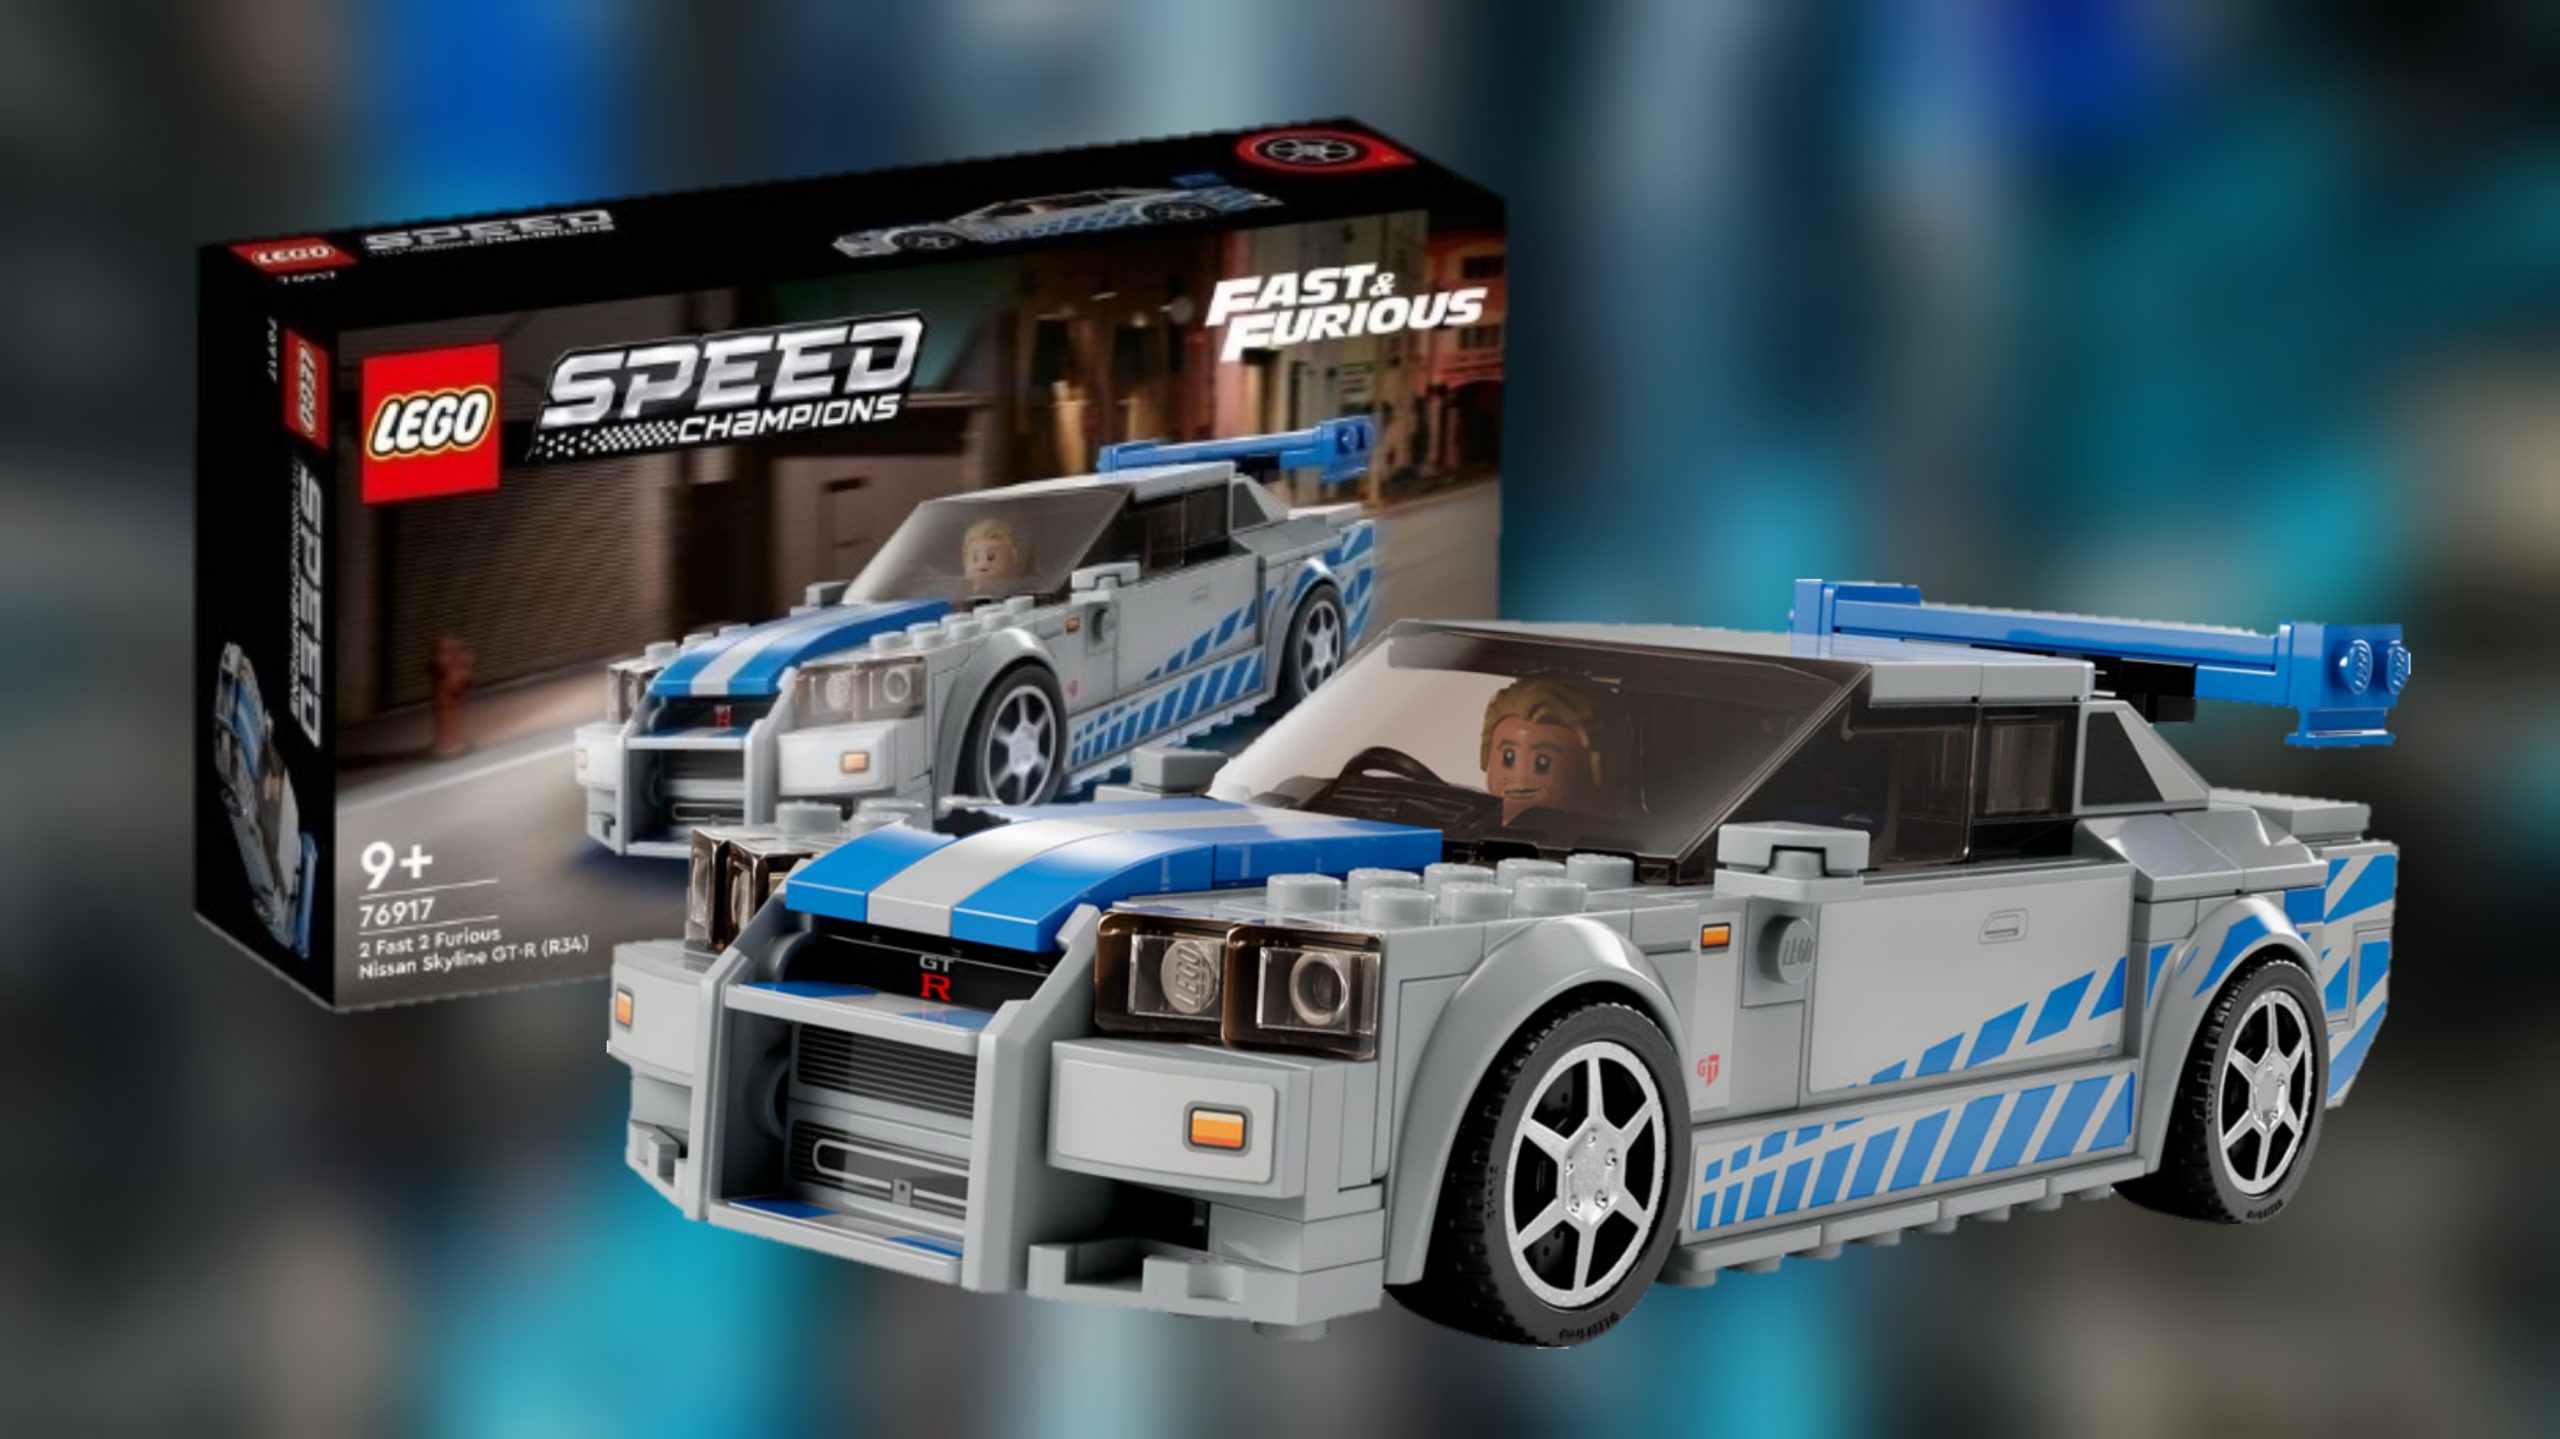 LEGO Speed Champions Fast Furious Nissan Skyline GT R The Brick Post